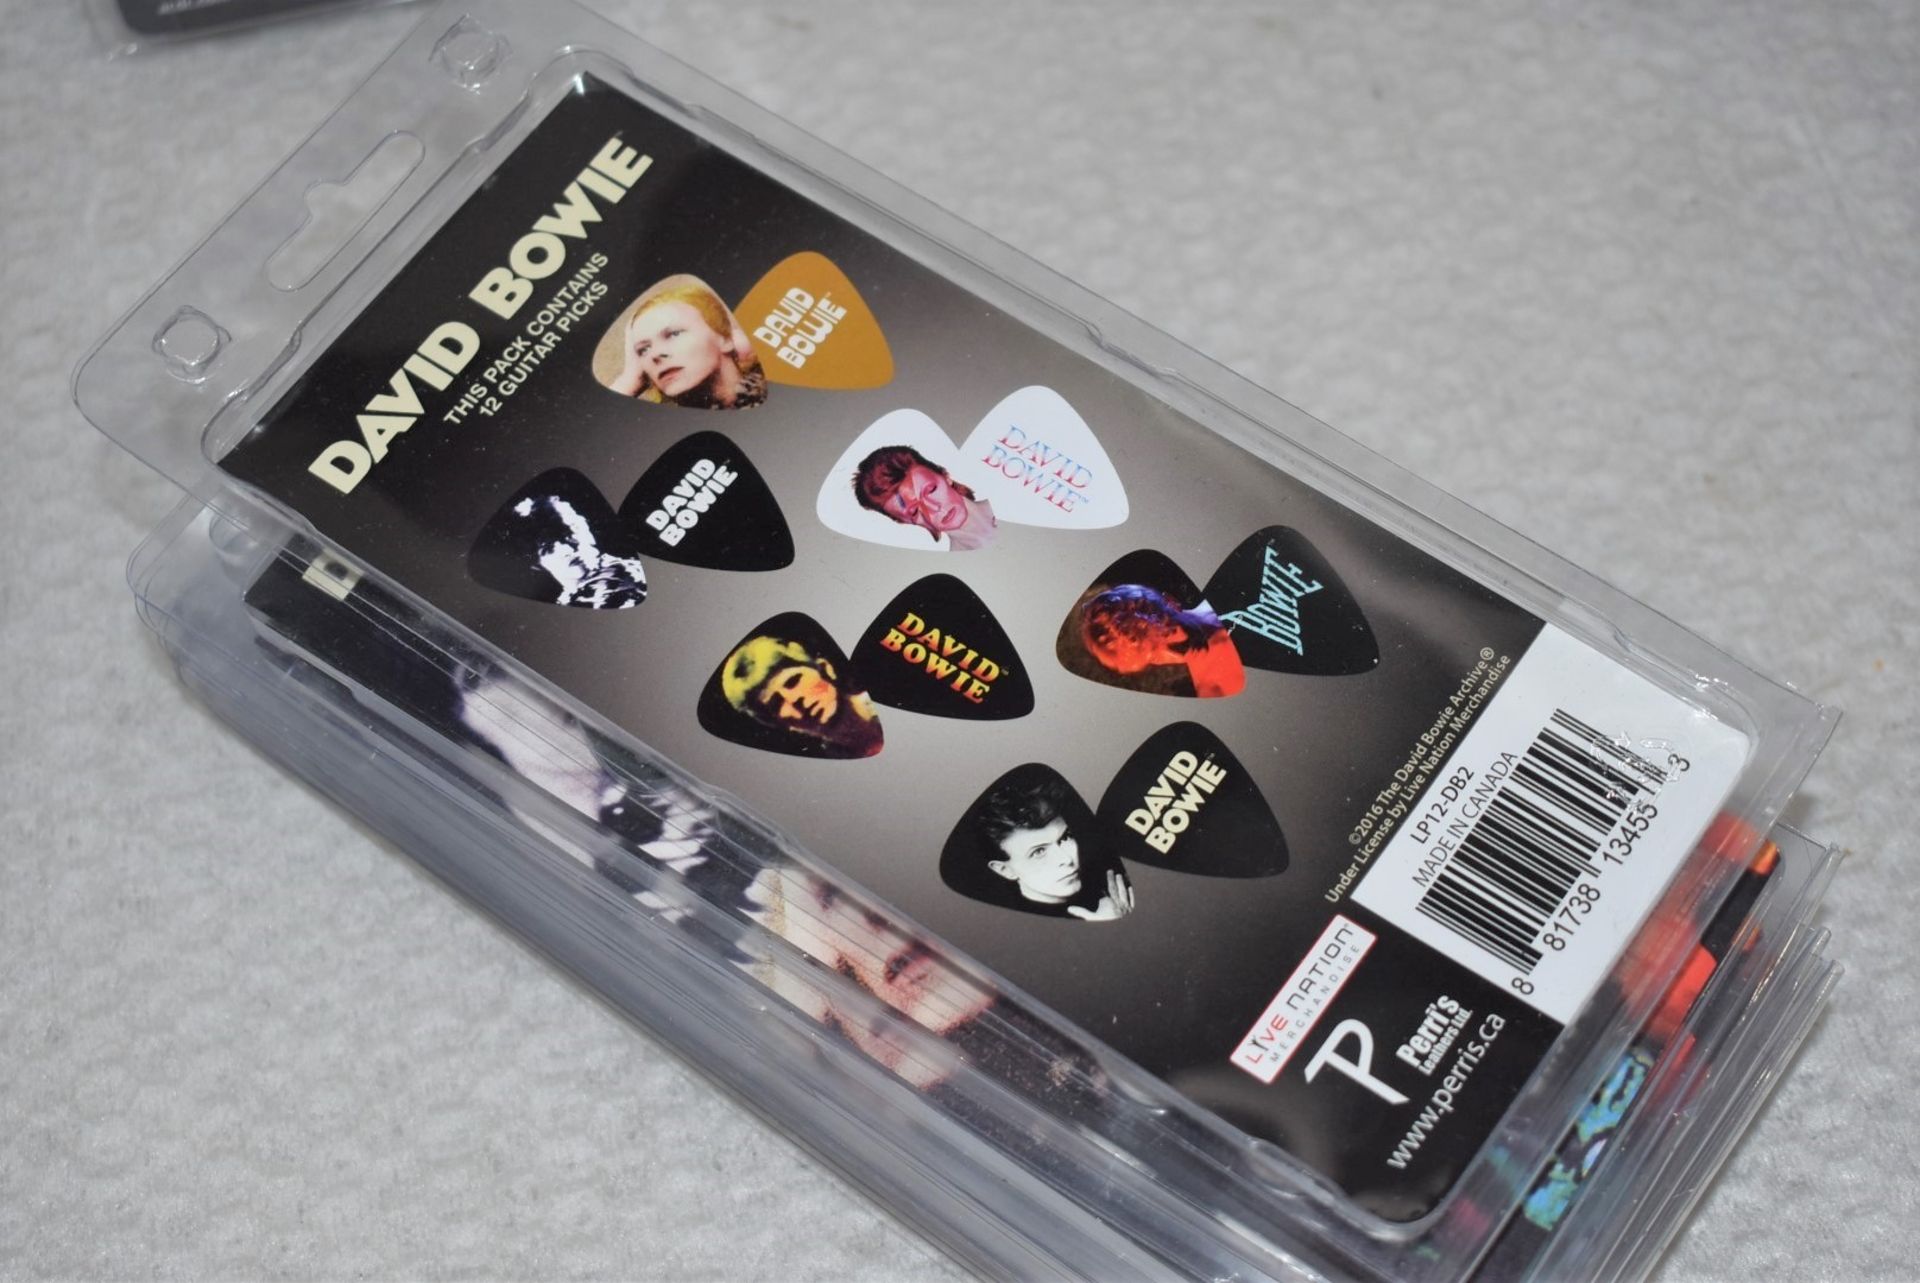 10 x David Bowie Guitar Pick Multipacks By Perri's - 6 Picks Per Pack - Officially Licensed - Image 7 of 7